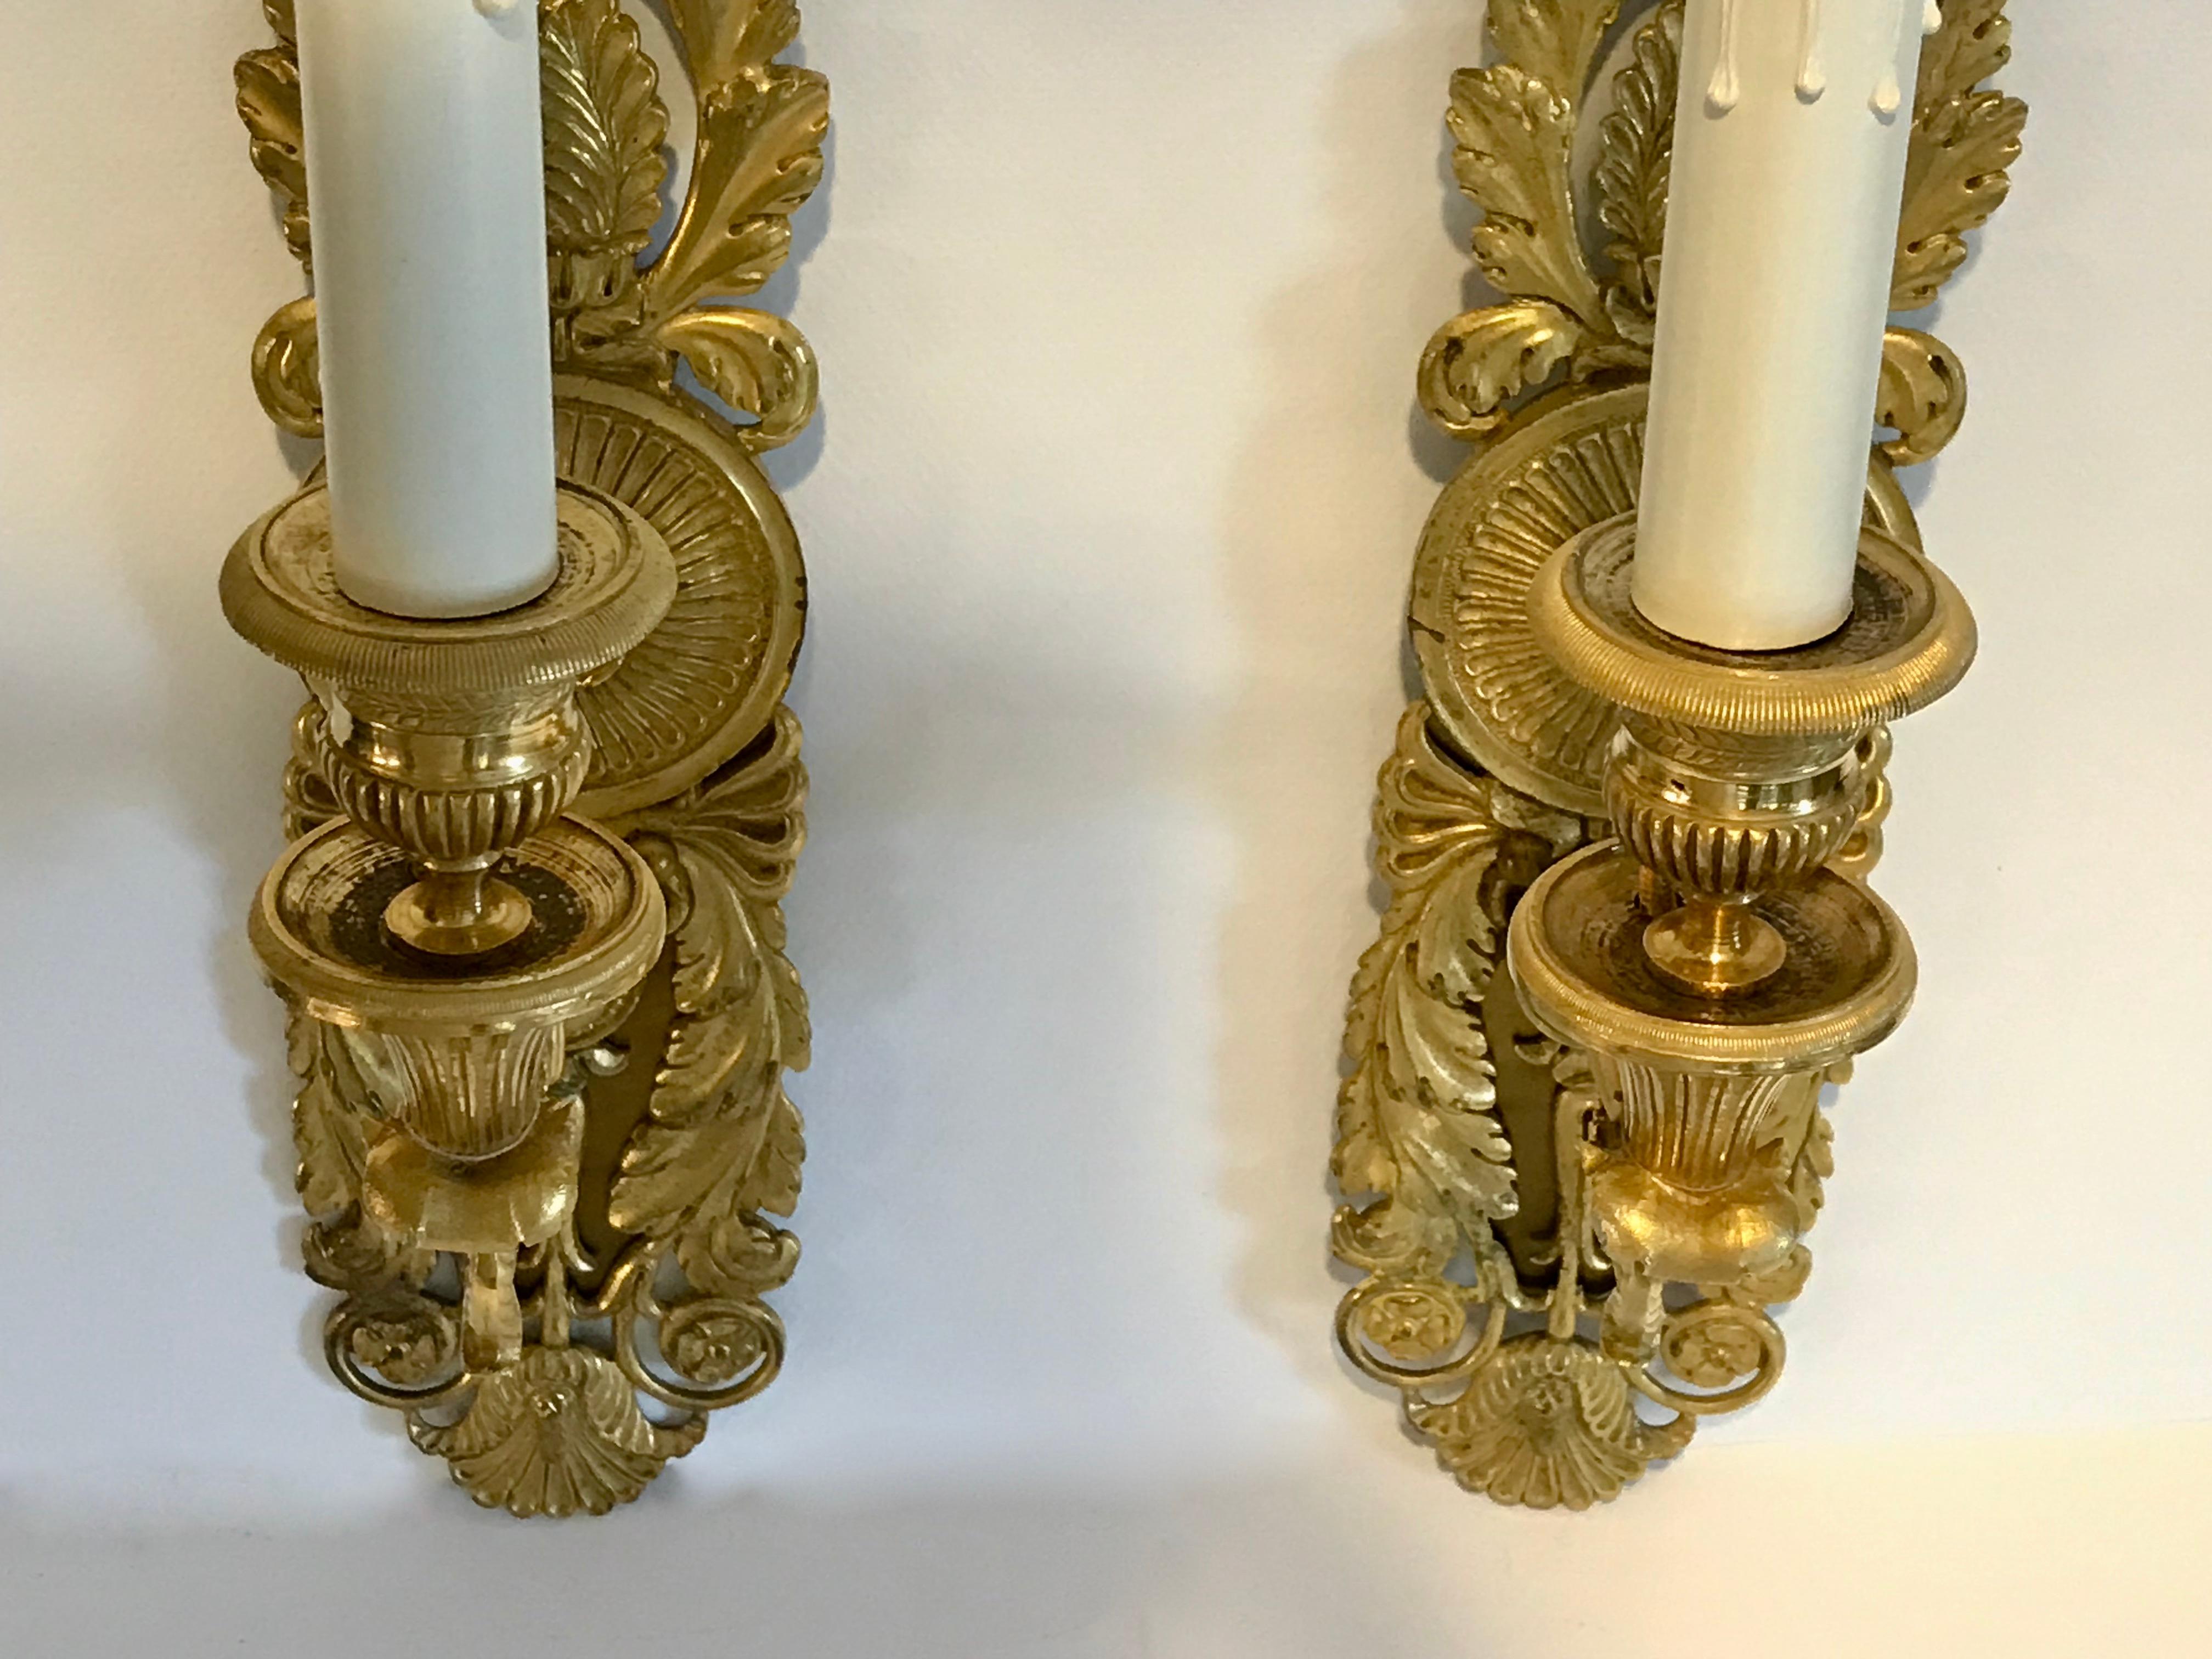 Early 20th Century Pair of French Empire Style Dore Gilt Bronze Wall Sconces